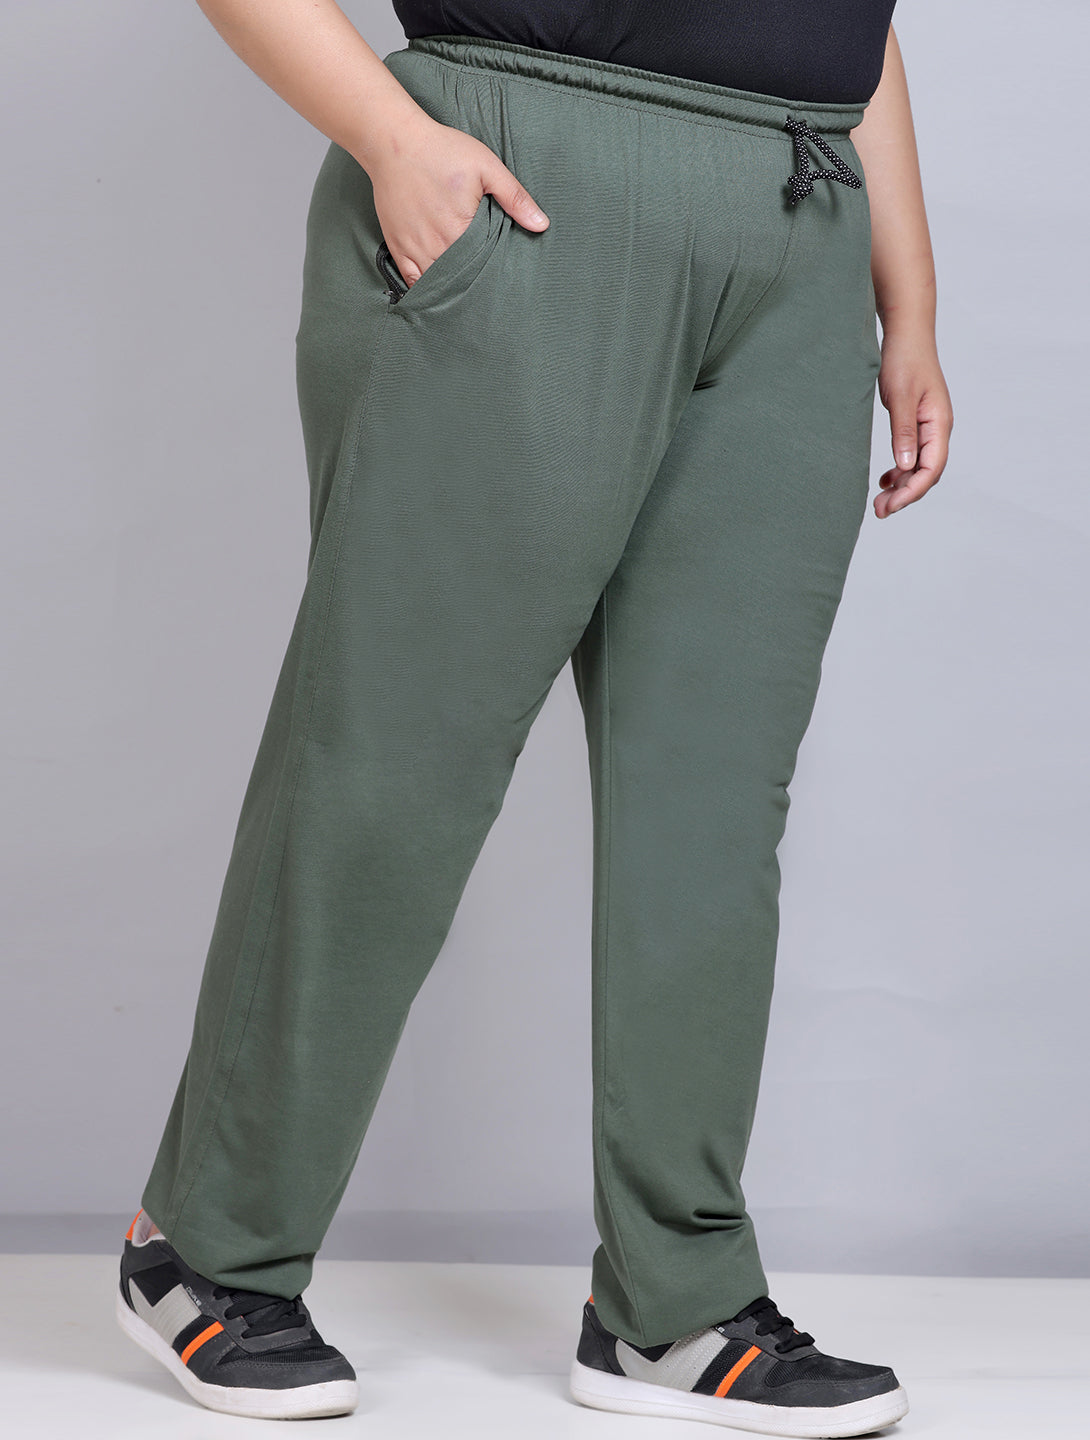 Women Cotton Pajama Evolove Women's Super Soft Comfortable Lounge Pants  with Pockets at Rs 200/piece in Mumbai